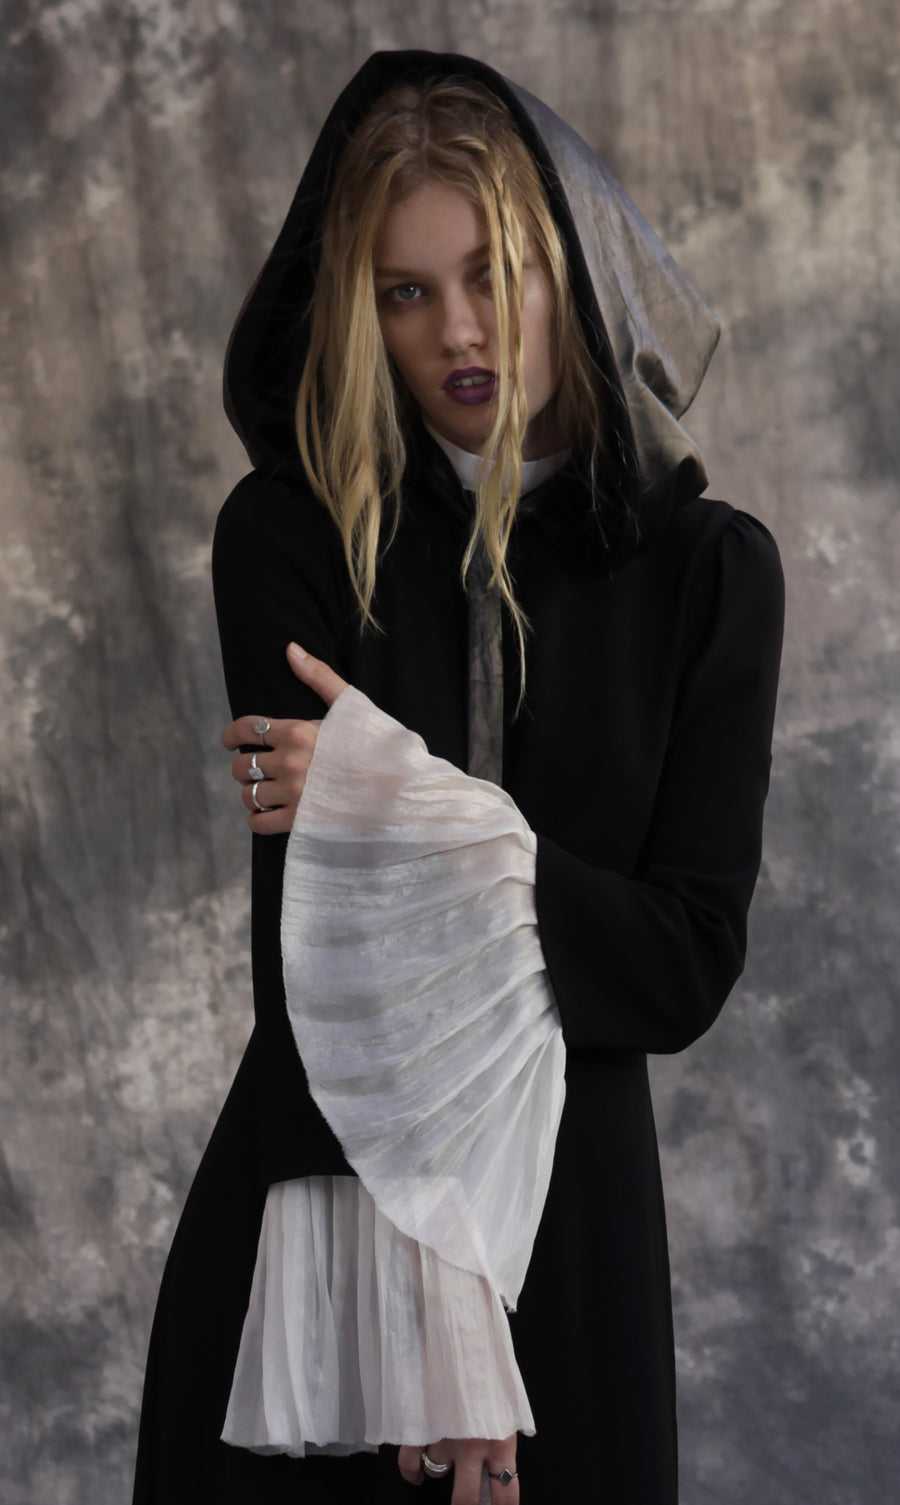 Maggie Laine IMG model Wendy Nichol SS17 Fashion Show Death Valley Reversible Leather & Cashmere Black Hood Handmade in NYC New York City Winter Fall Hat Headpiece Bow Tie Shoulder Cover Reversible Hooded Goth Gothic Pilgrim 